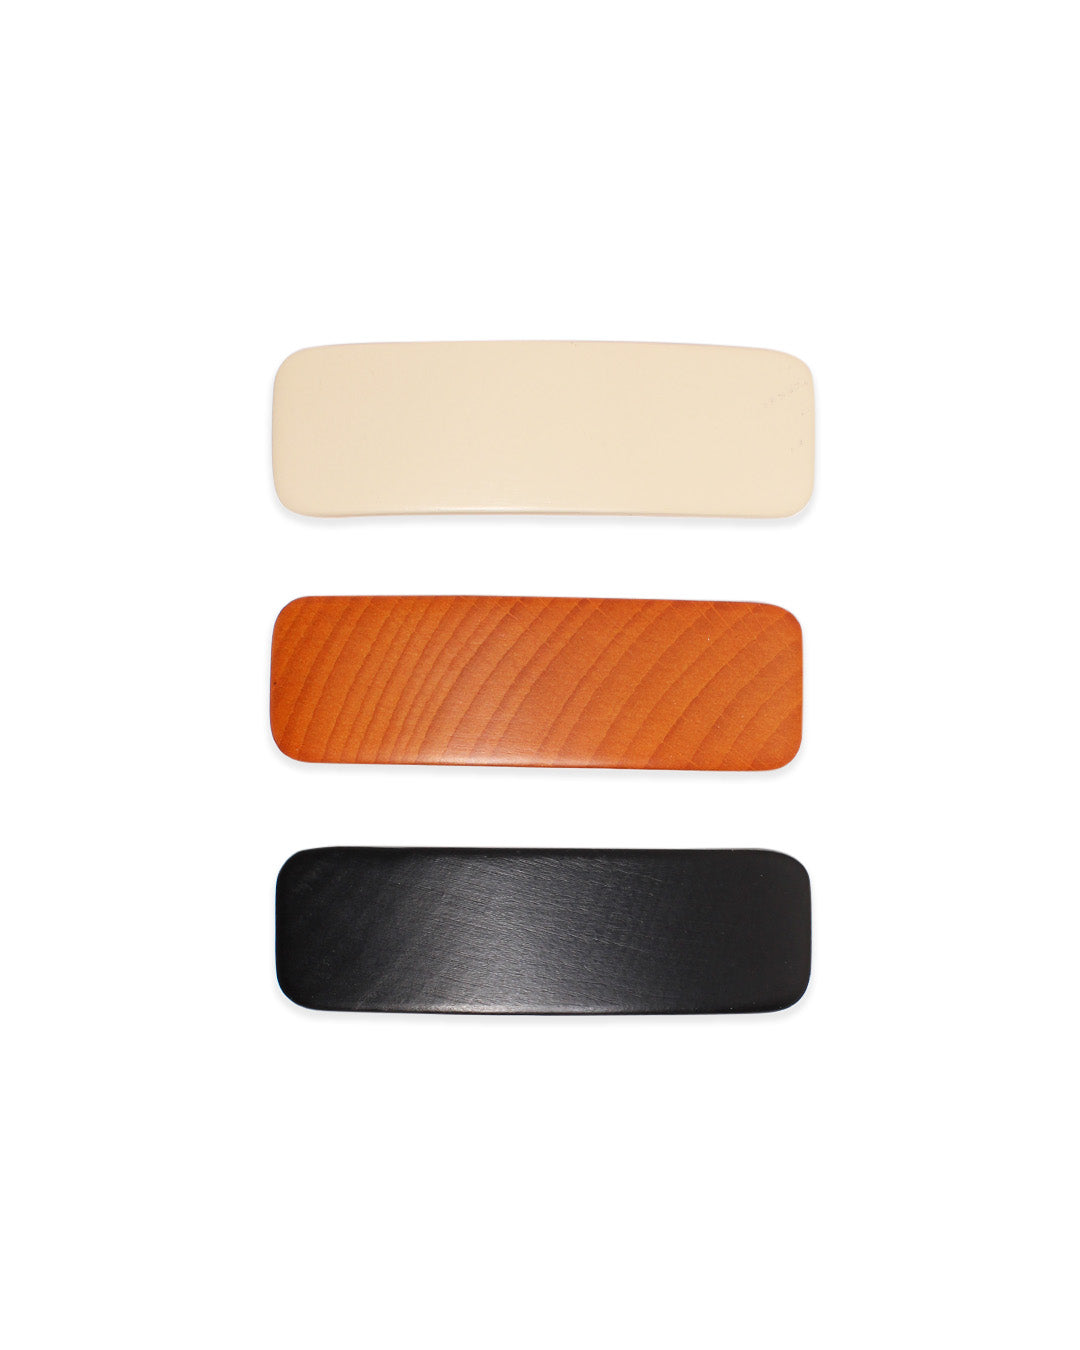 3 colors of wooden barrettes on a white background.